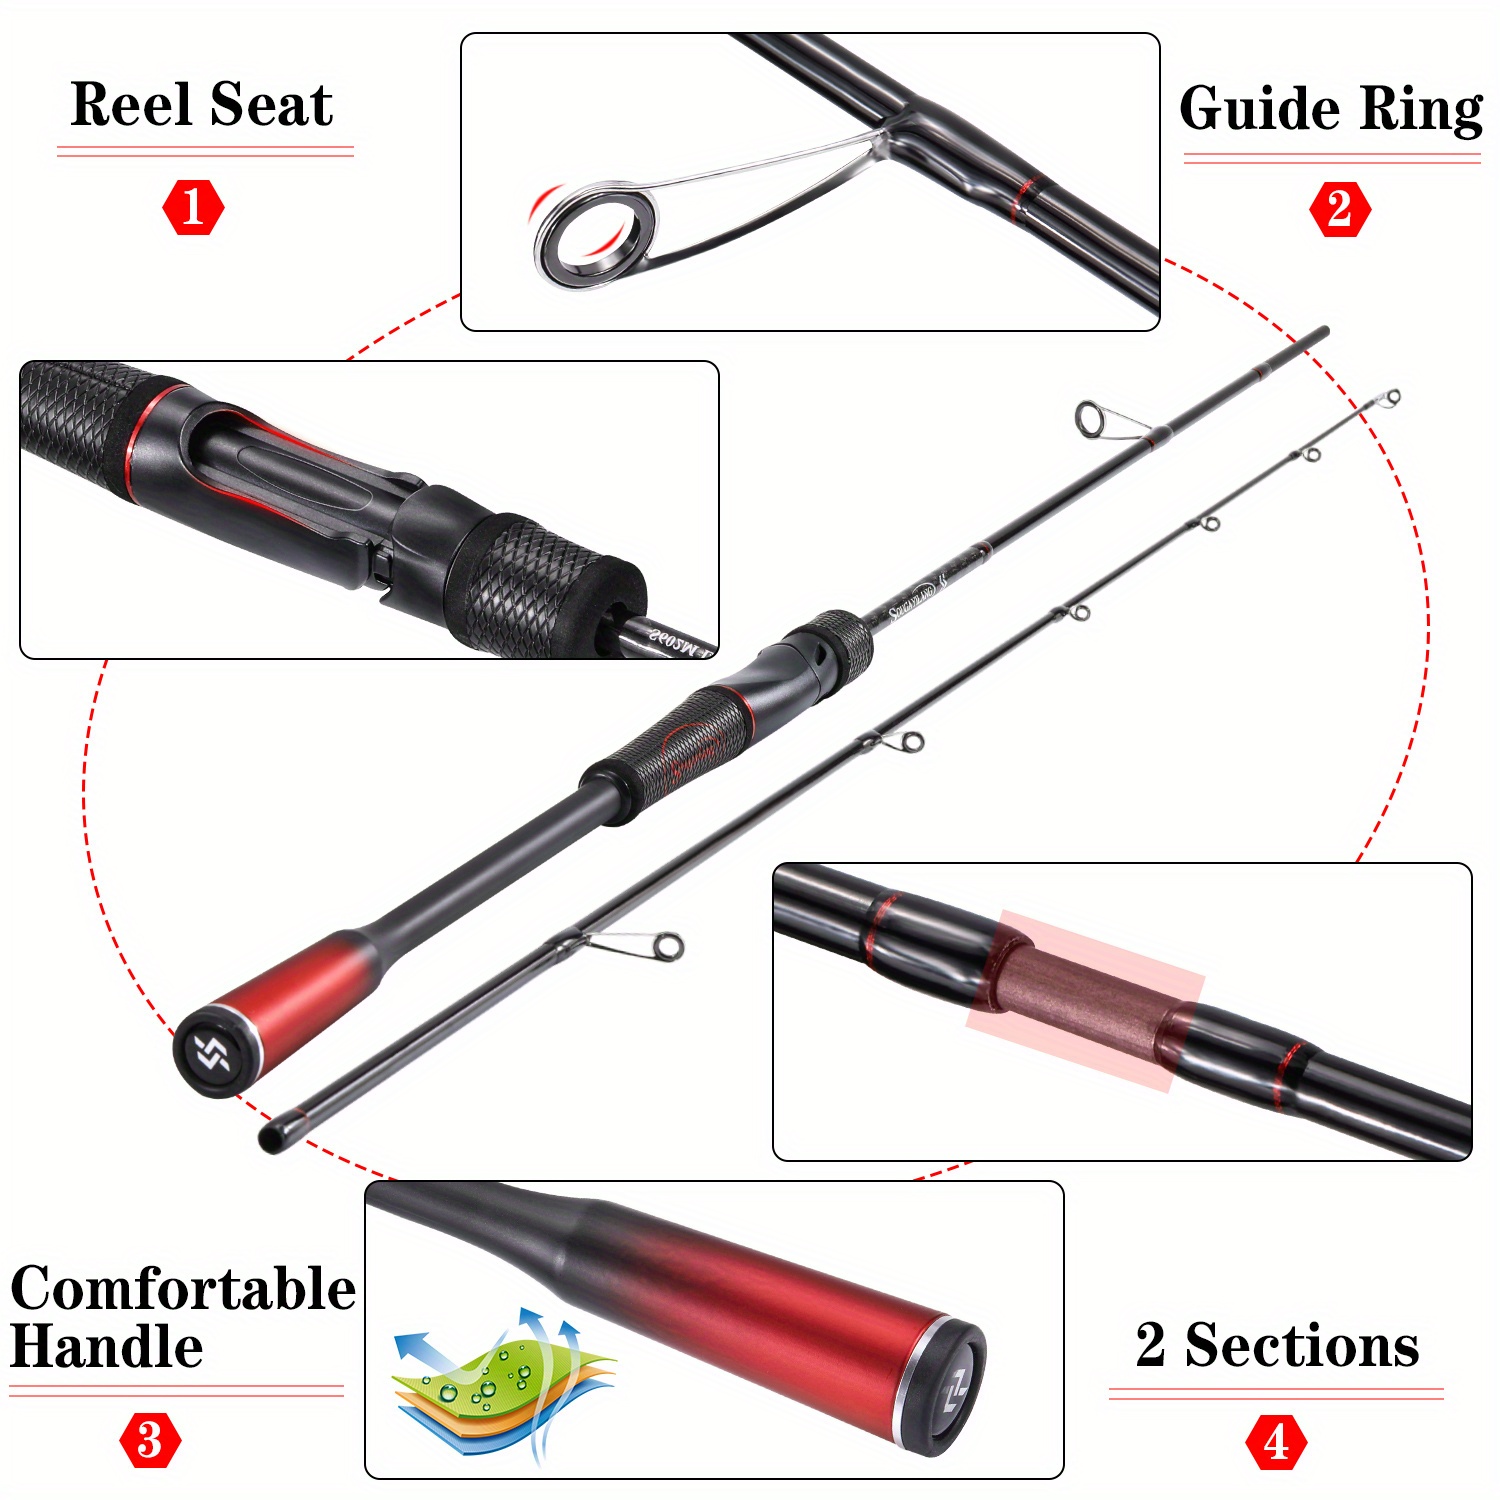 One Bass Fishing Pole 24 Ton Carbon Fiber Casting and Spinning Rods - Two  Pieces, SuperPolymer Handle Fishing Rod for Bass Fishing, Spinning Rods 